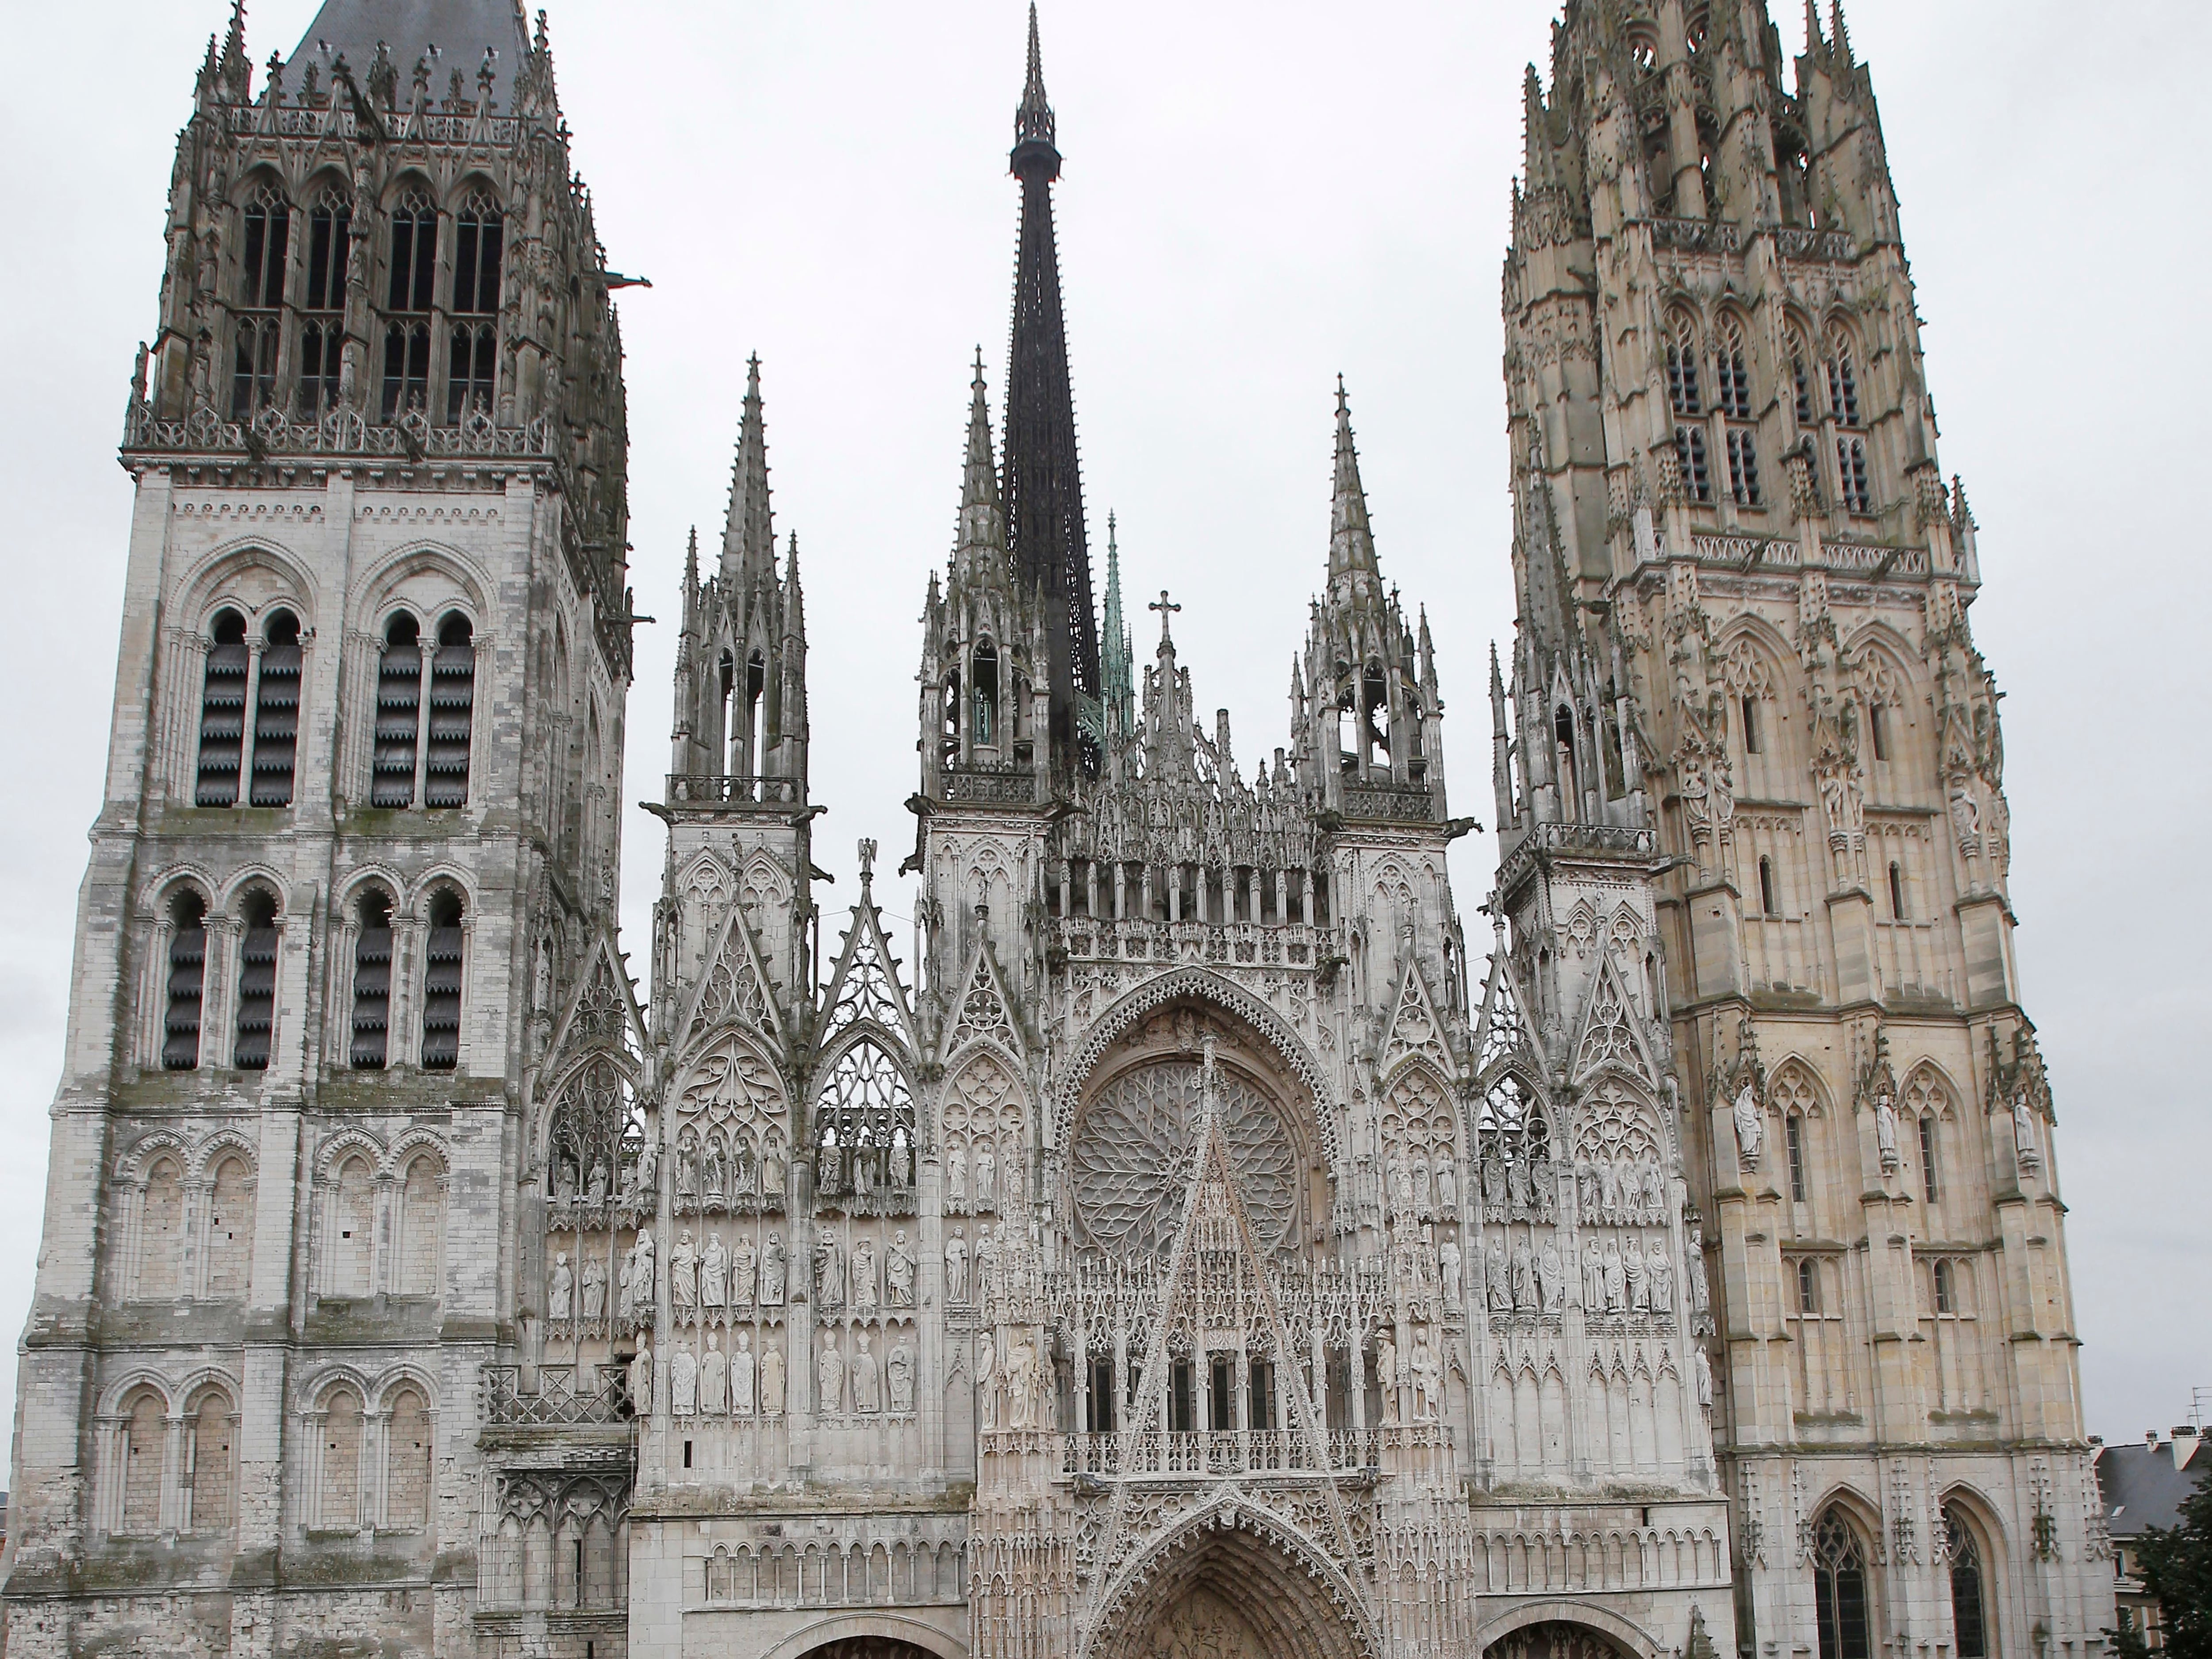 Fire breaks out in spire of medieval cathedral in French city of Rouen